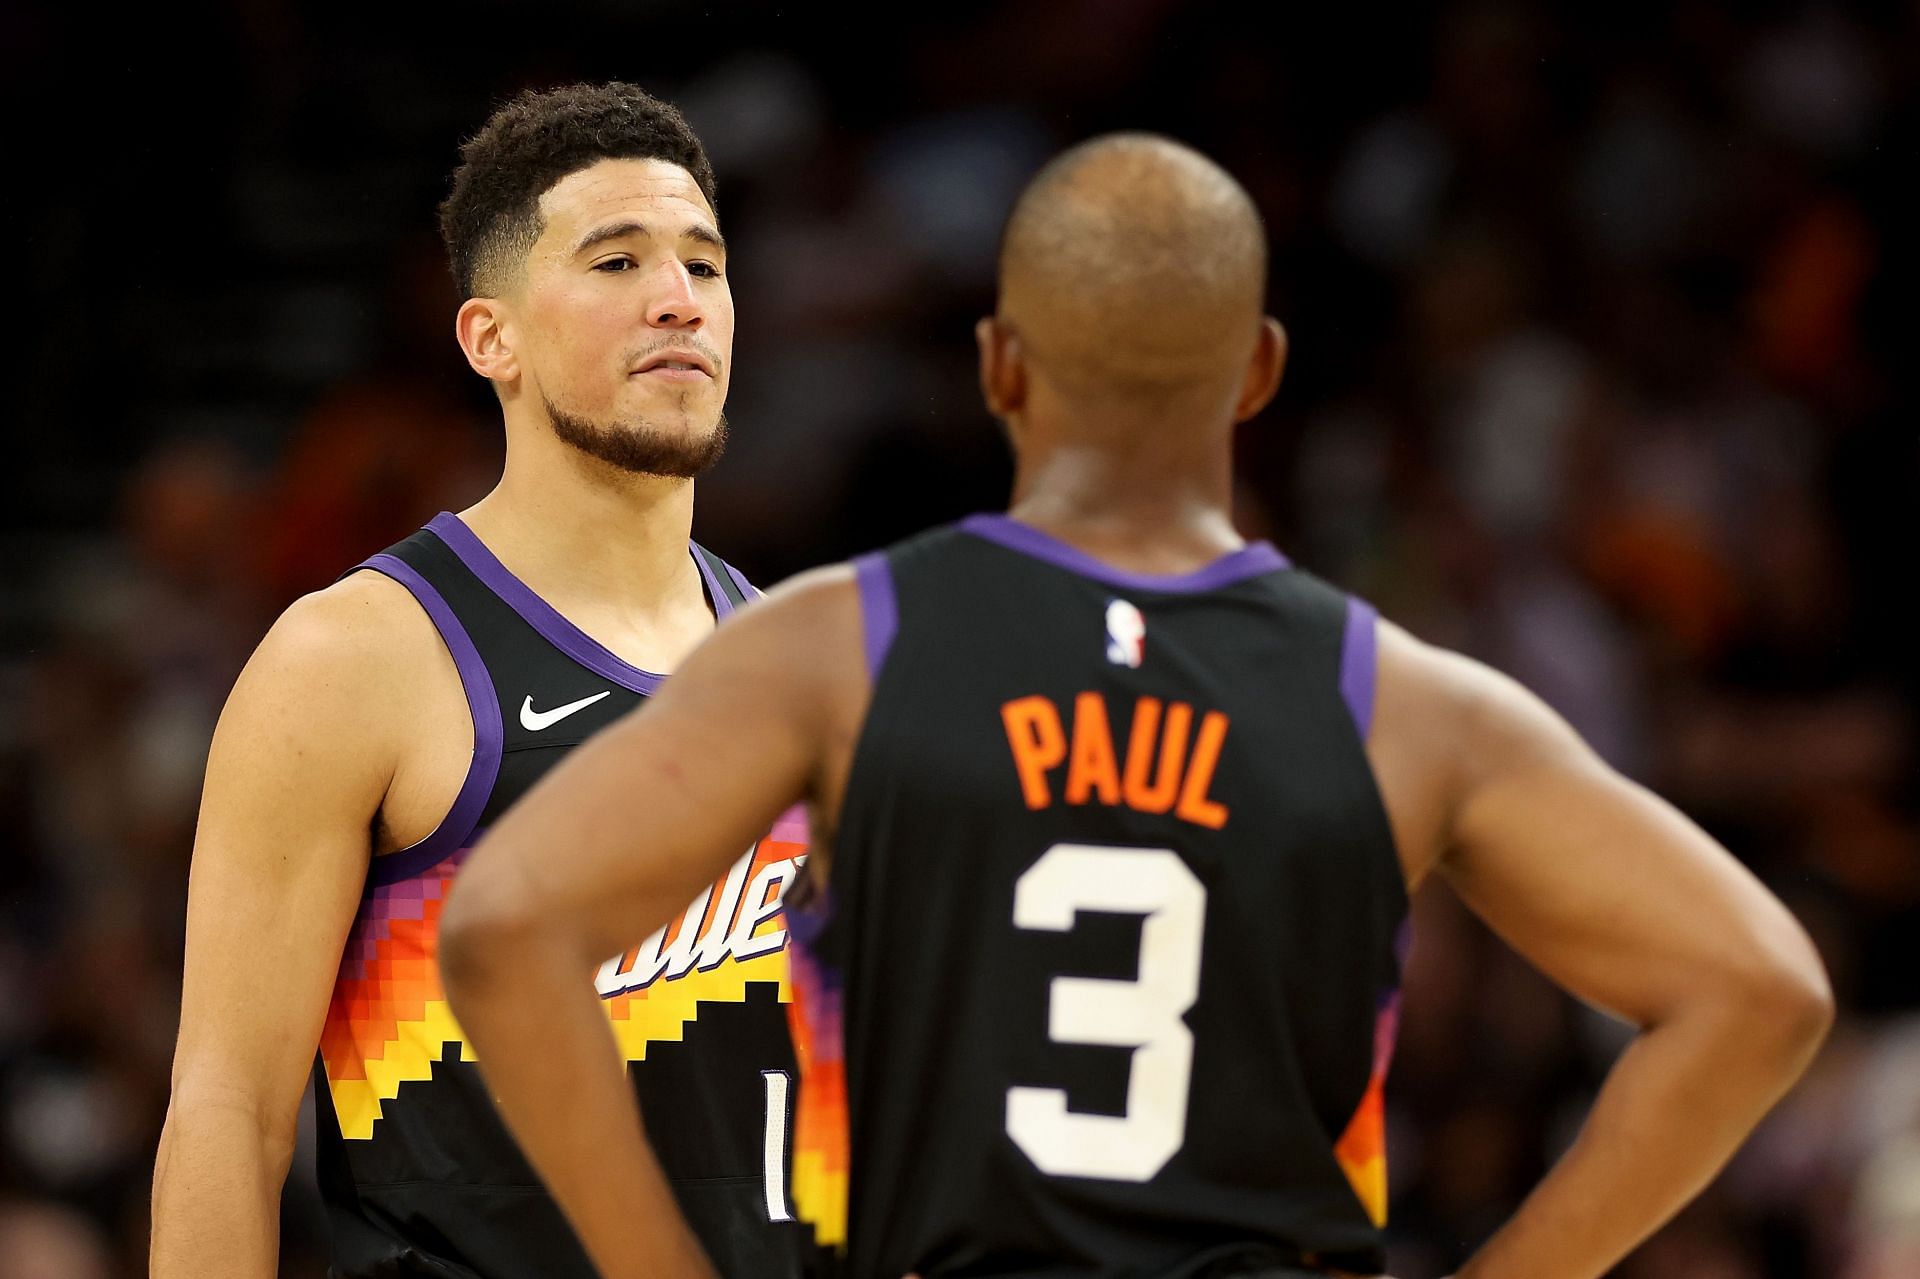 Devin Booker, Chris Paul suffered a premature exit from the 2022 Playoffs on Sunday